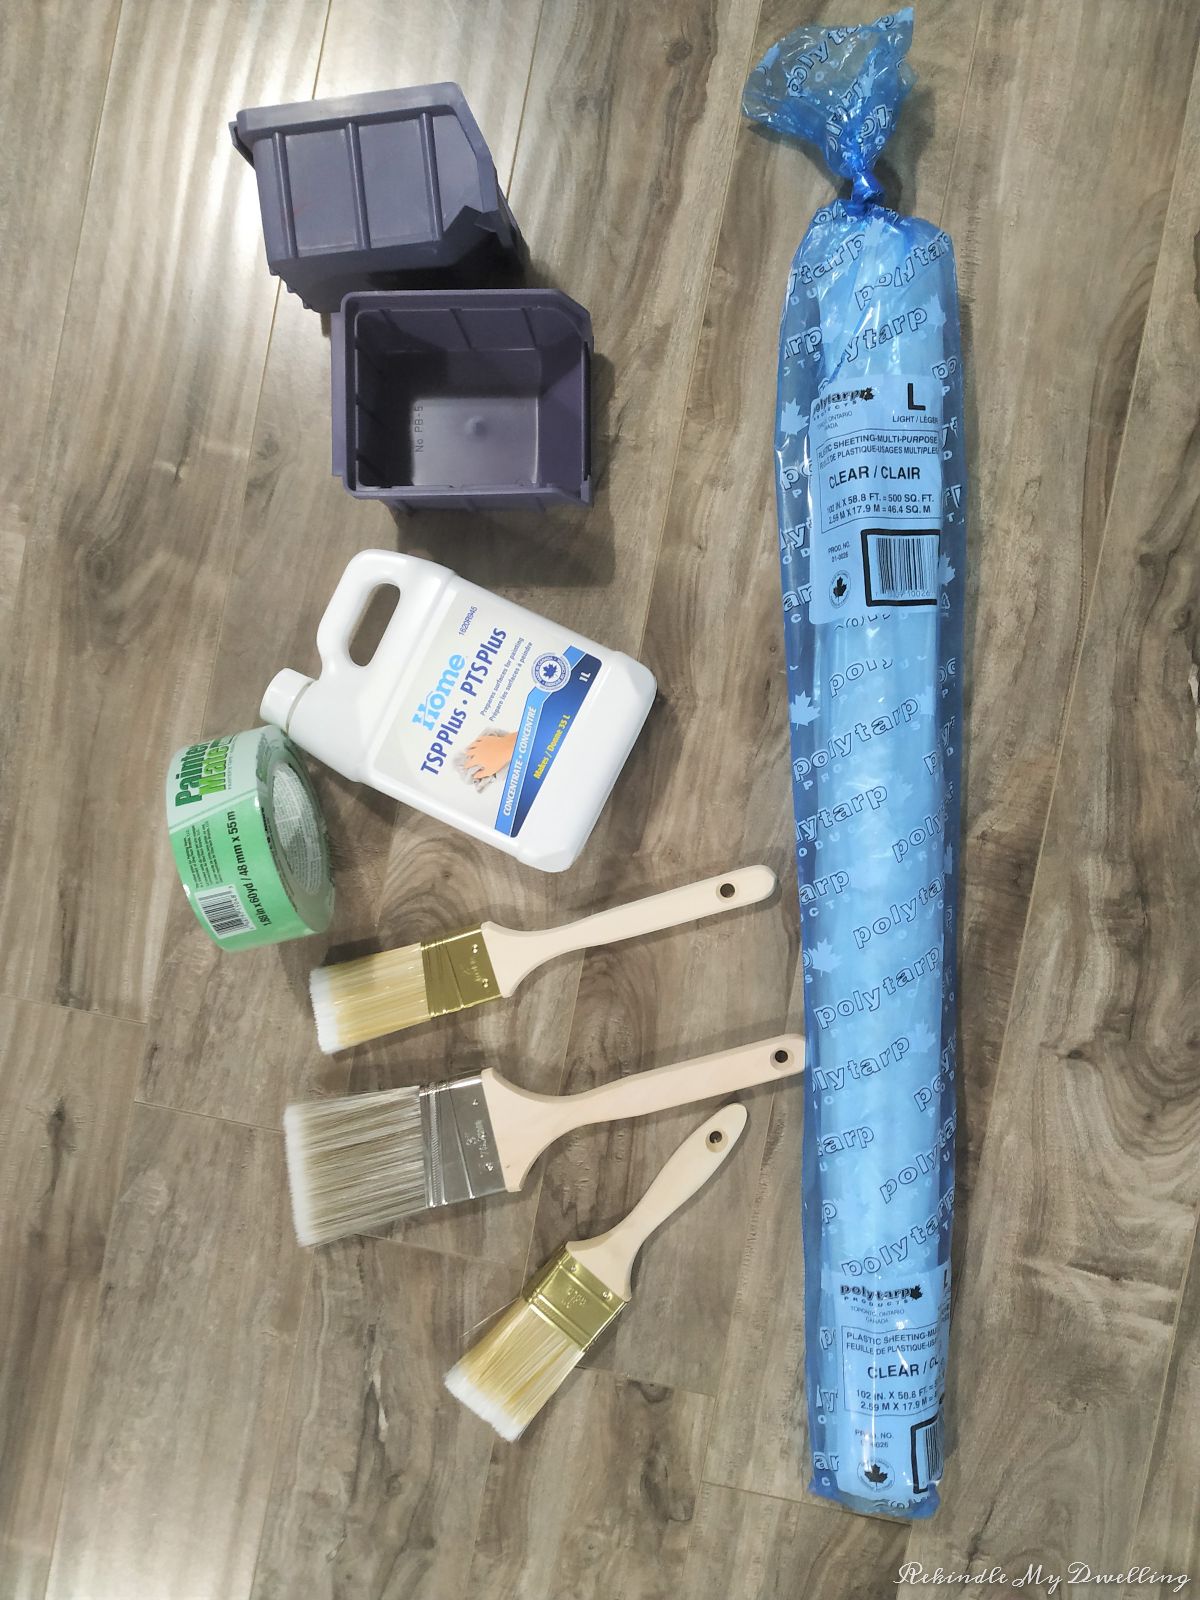 Materials needed for a brick fireplace makeover including paint brushes, tape, cleaner, plastic sheeting.